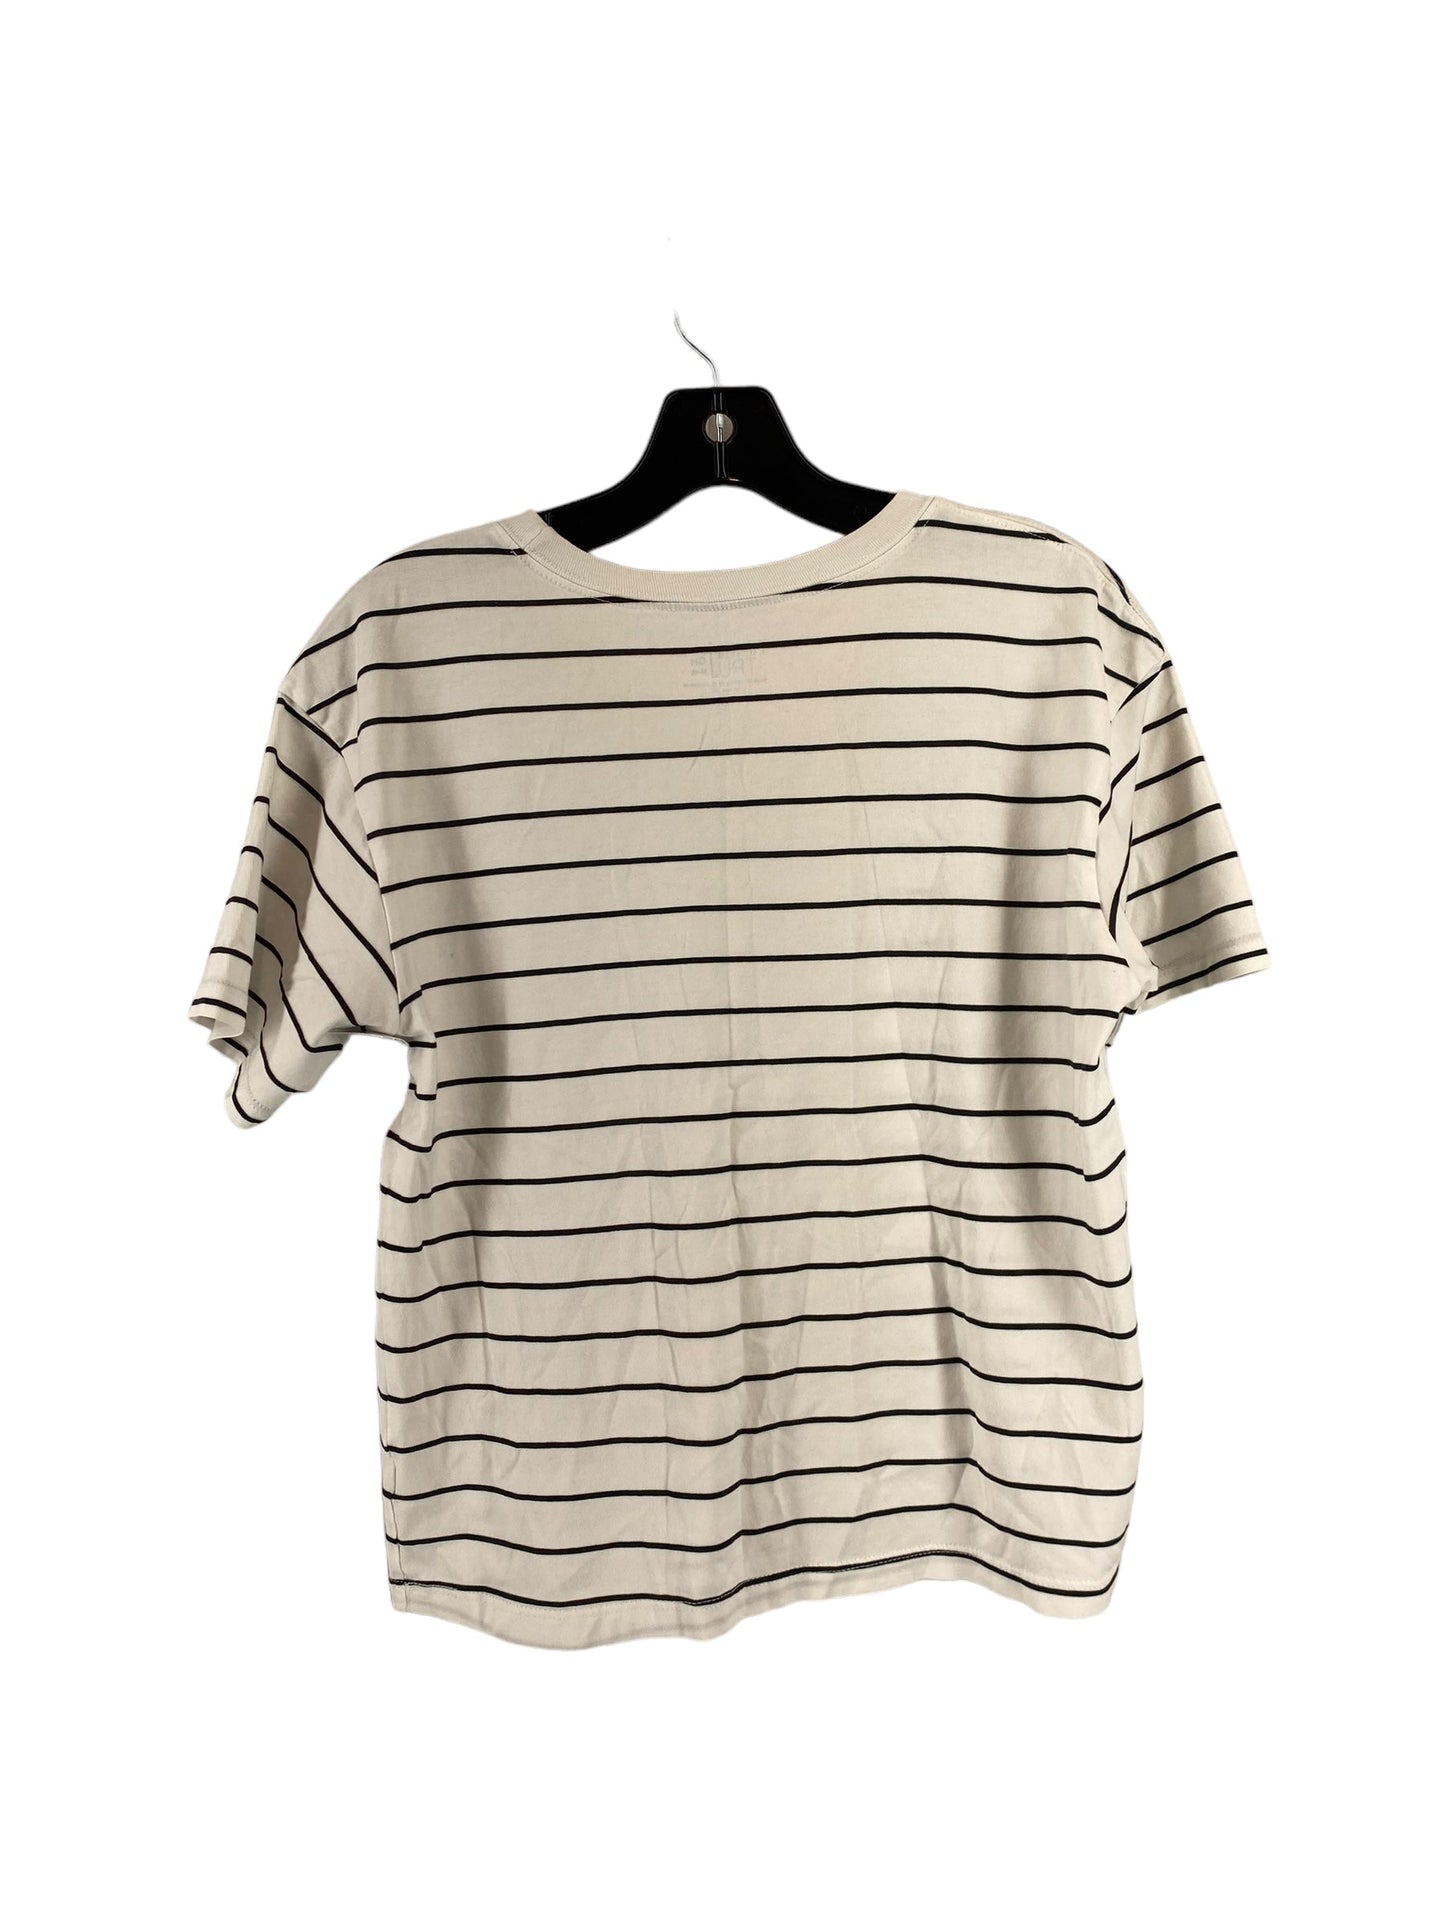 Striped Pattern Top Short Sleeve Time And Tru, Size S